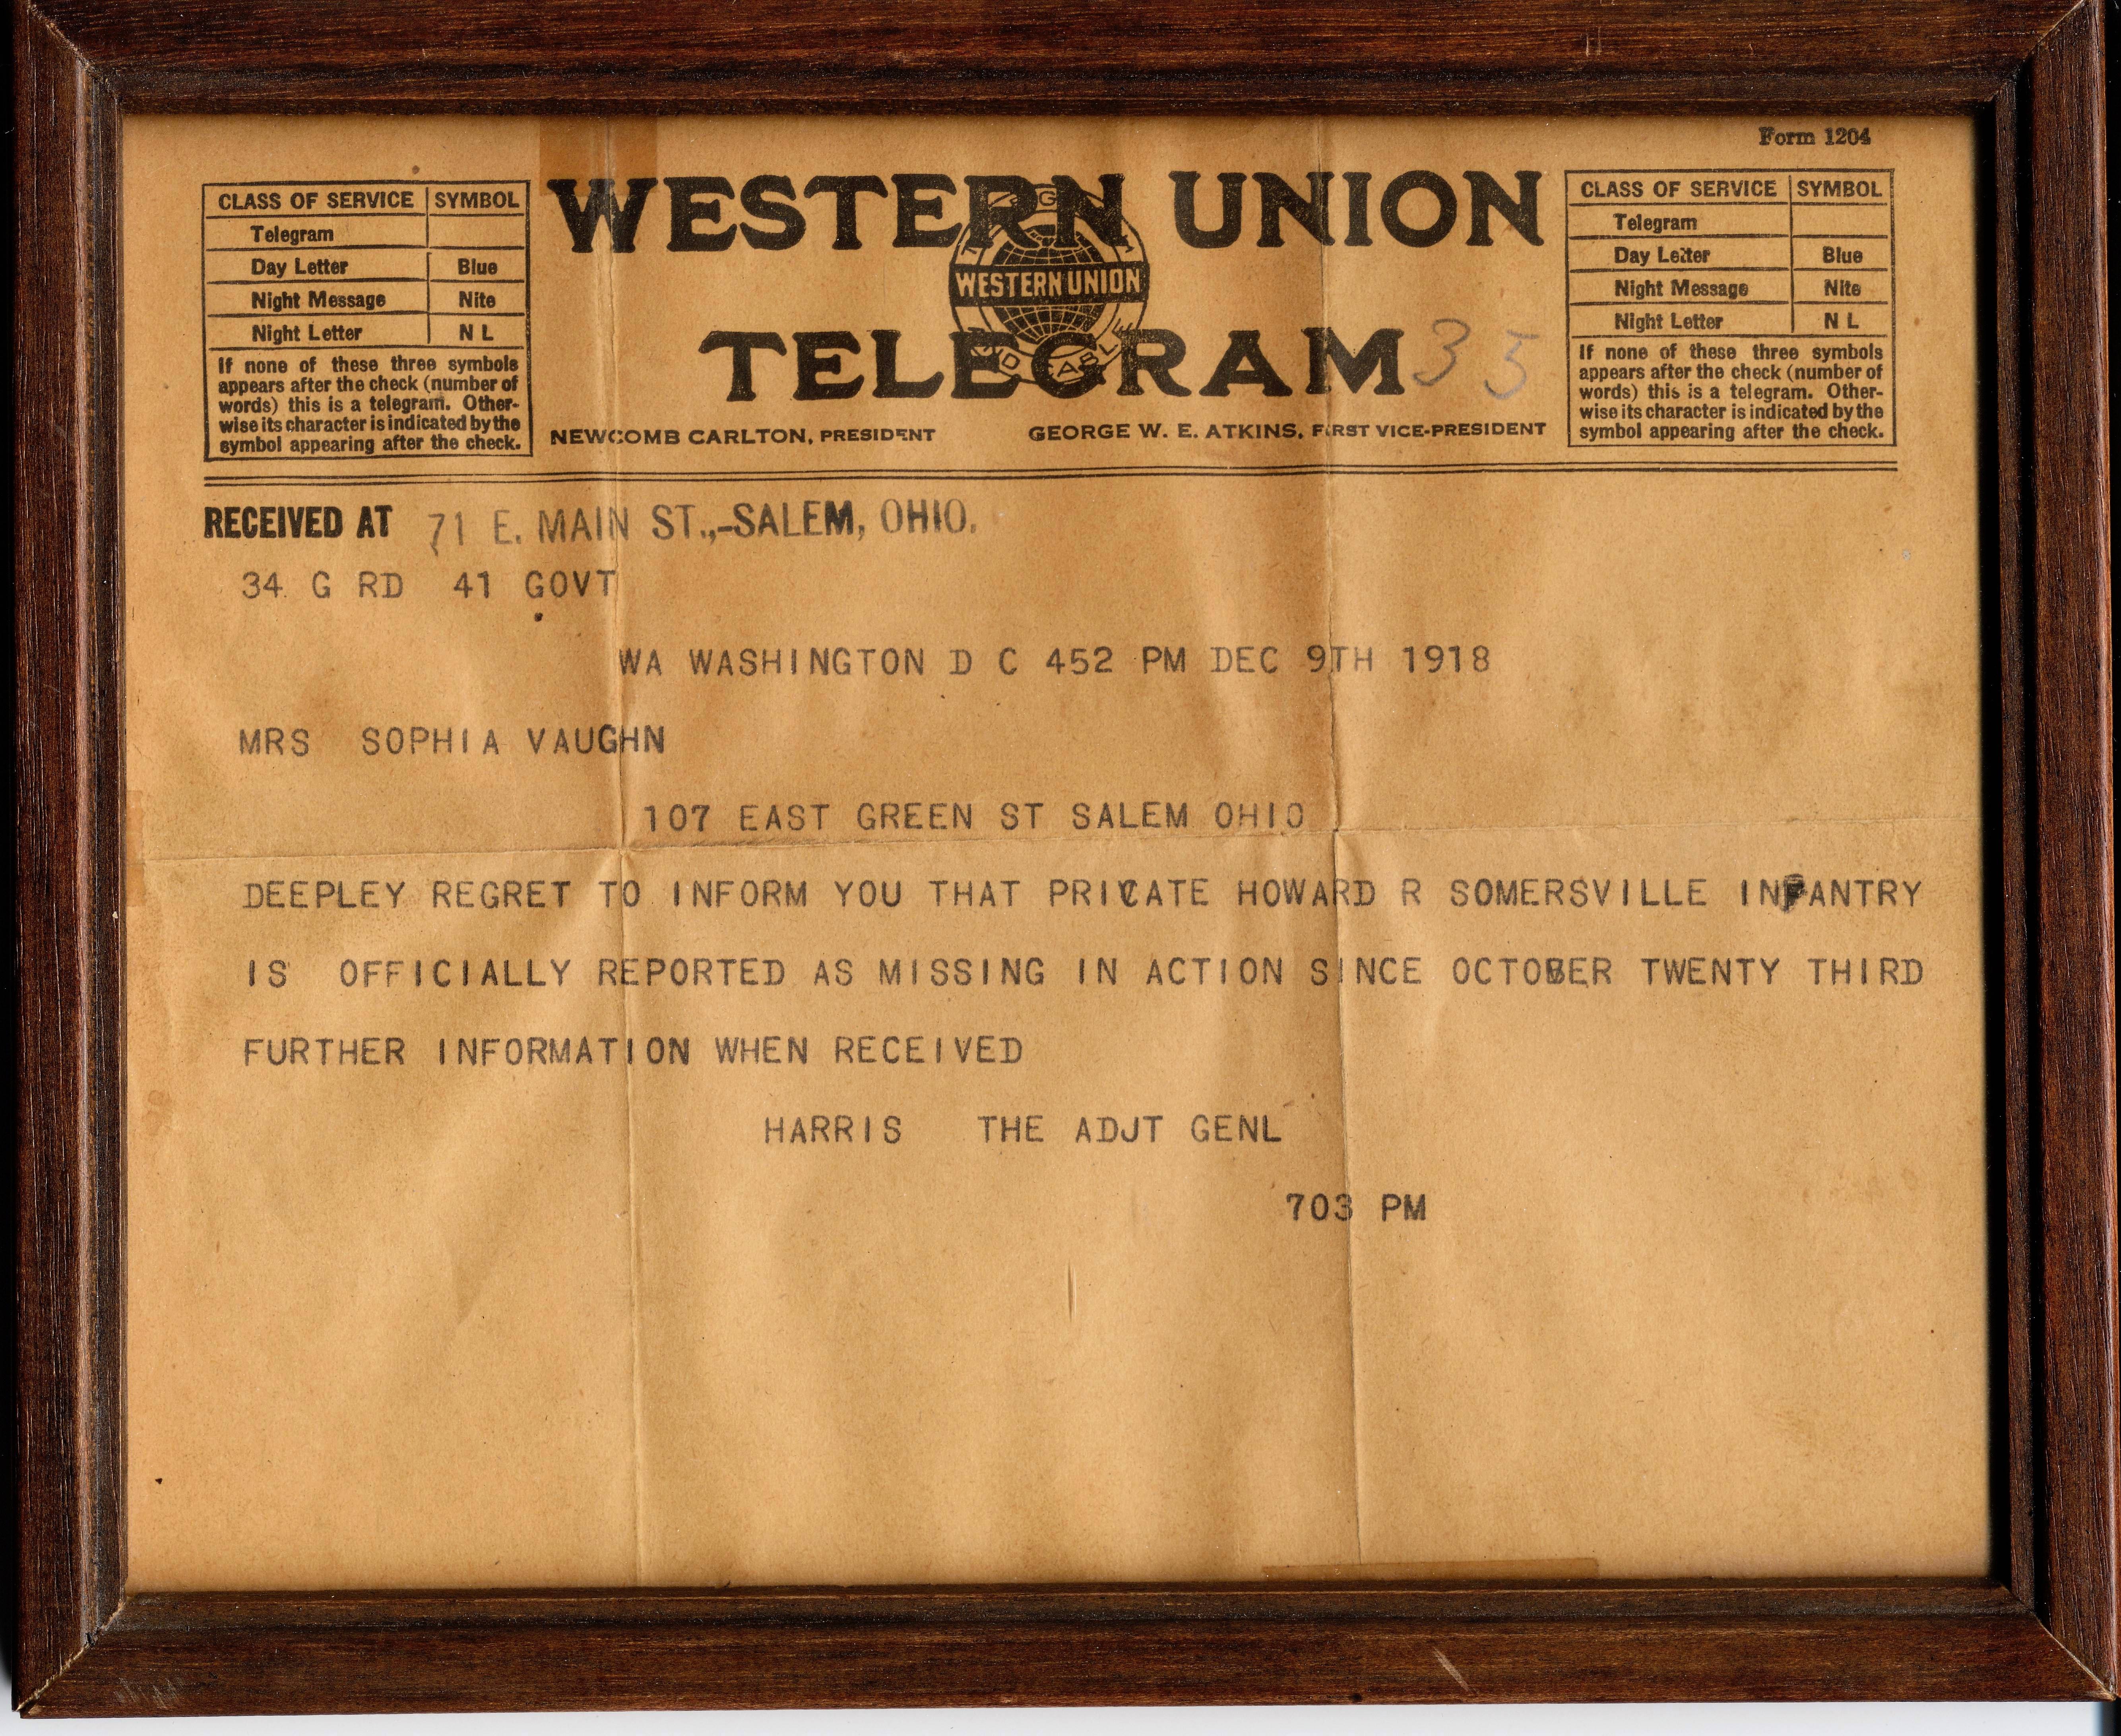 Telegram sent to Sophia Vaughn regarding her son who was reported as missing in action.